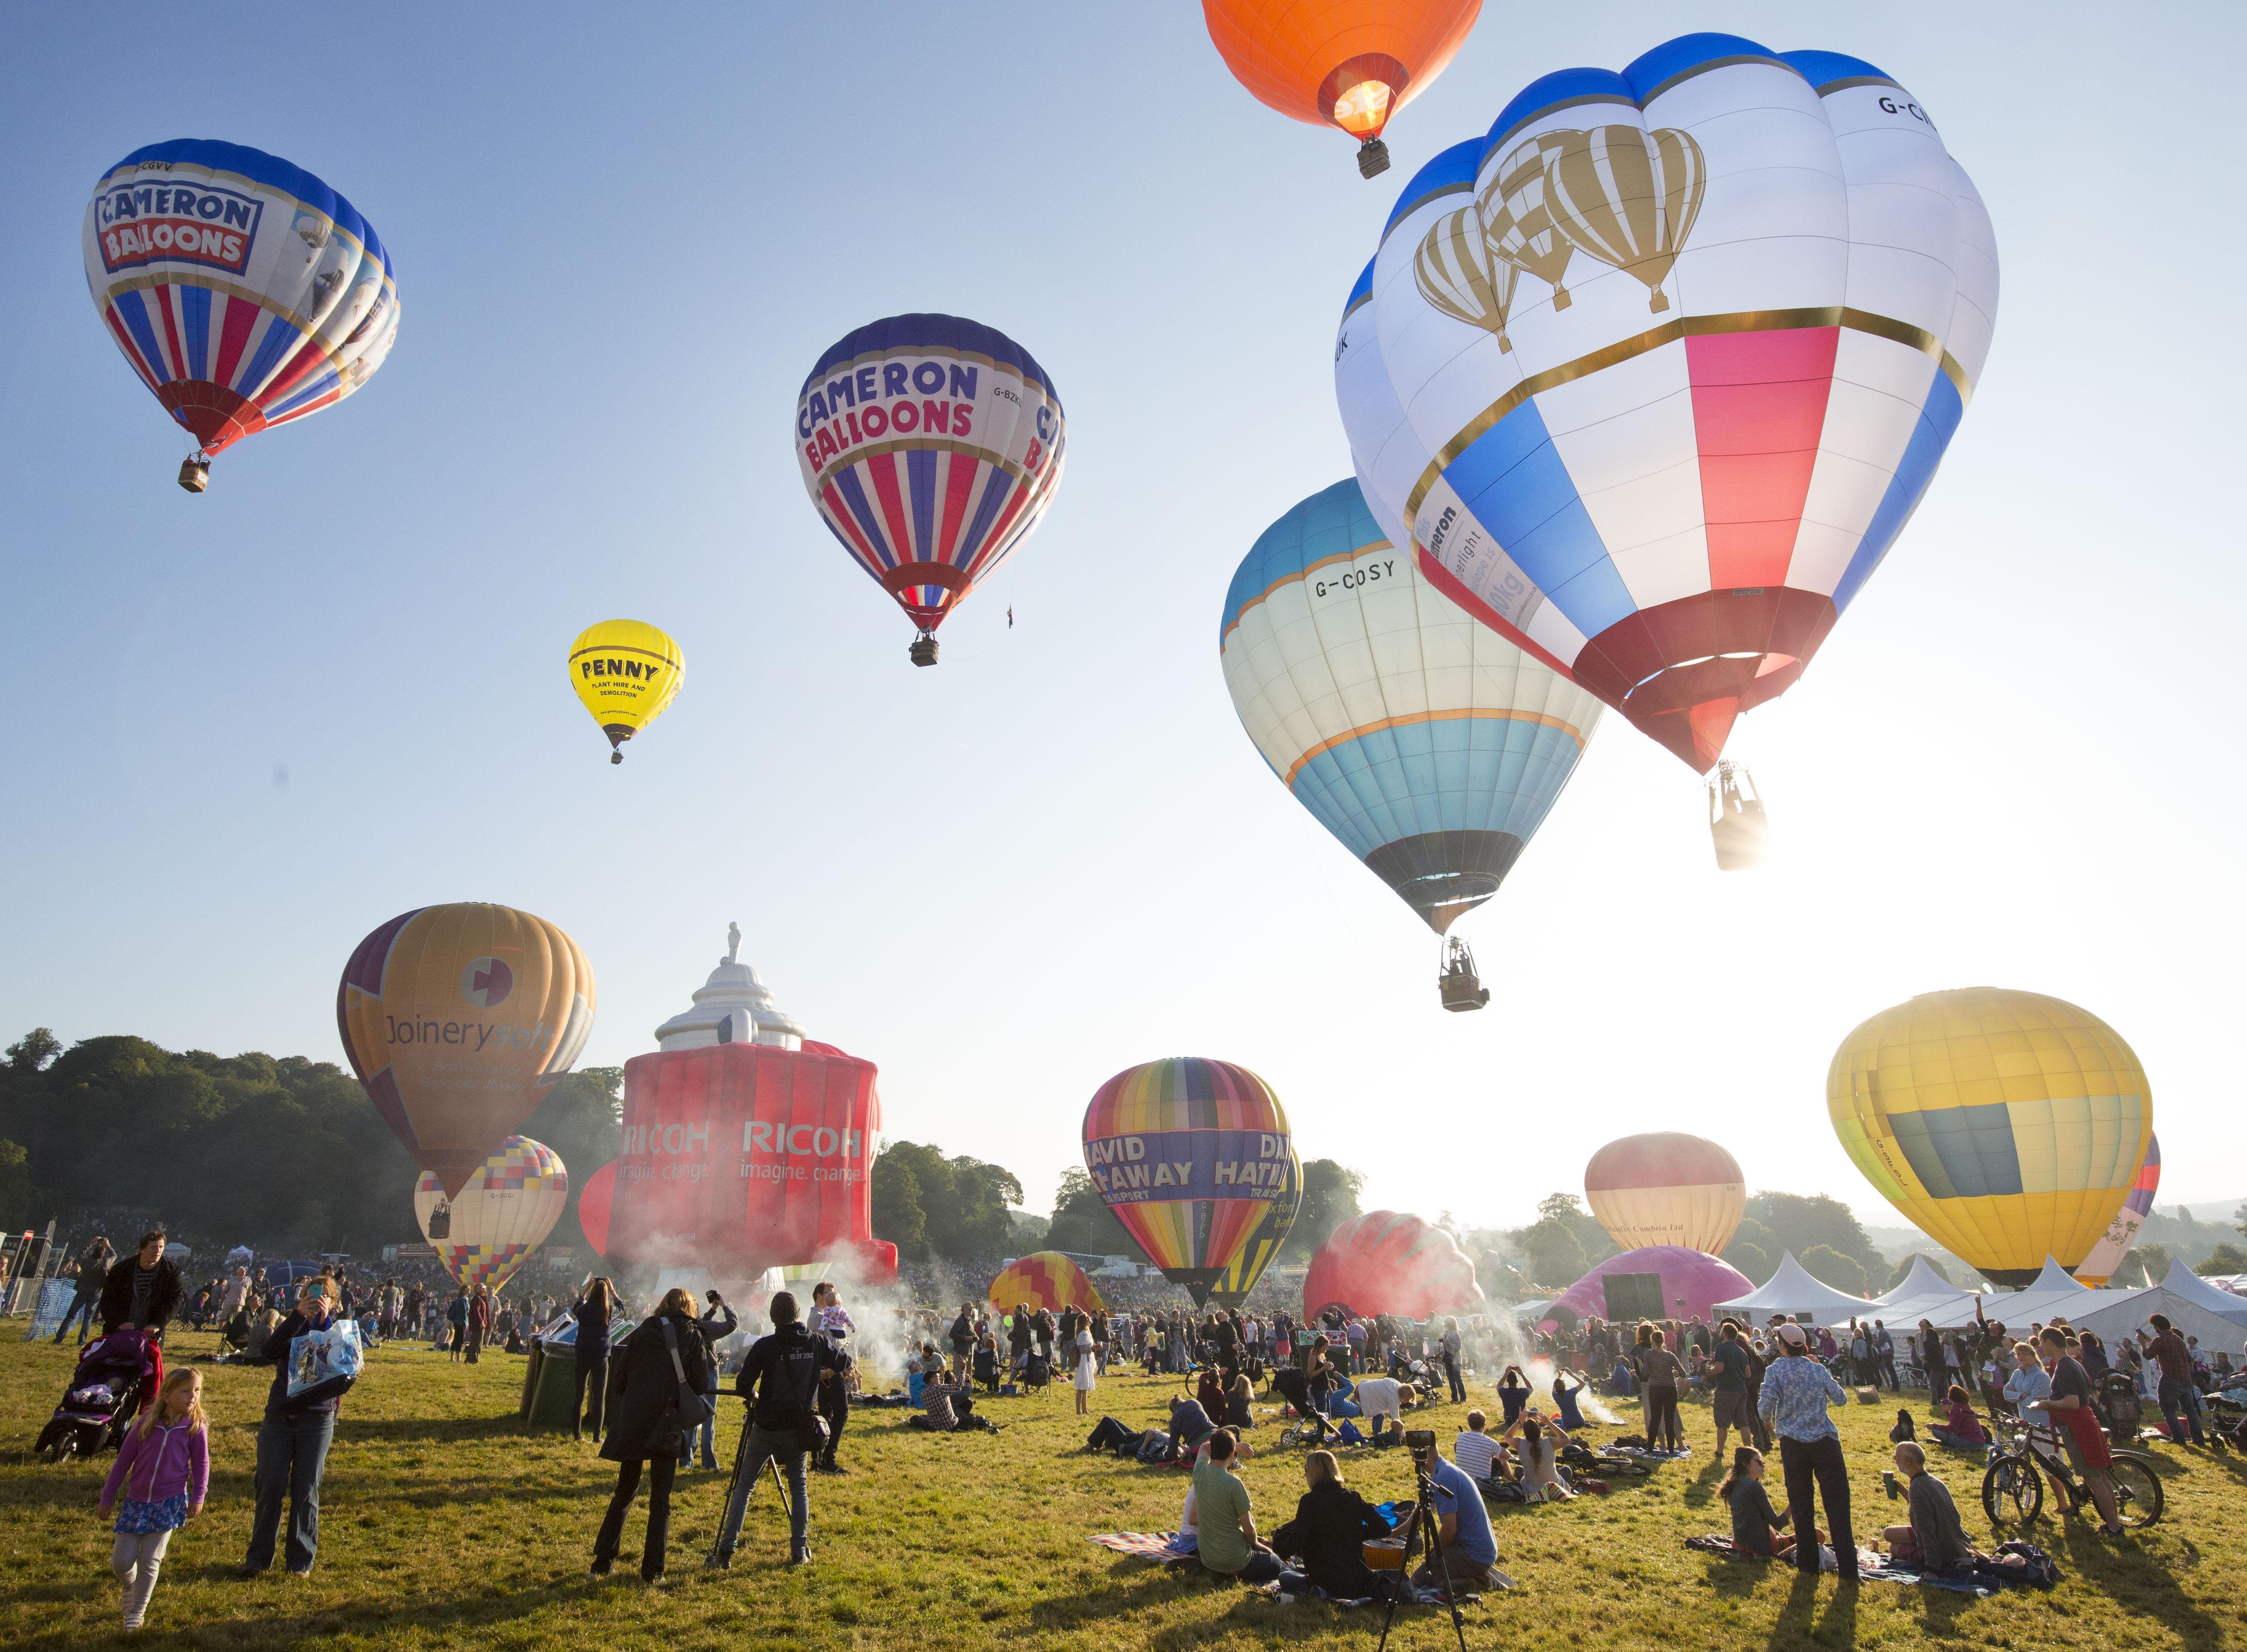 Hot air balloons filling the sky at Bristol Balloon Festival, as onlookers look up.